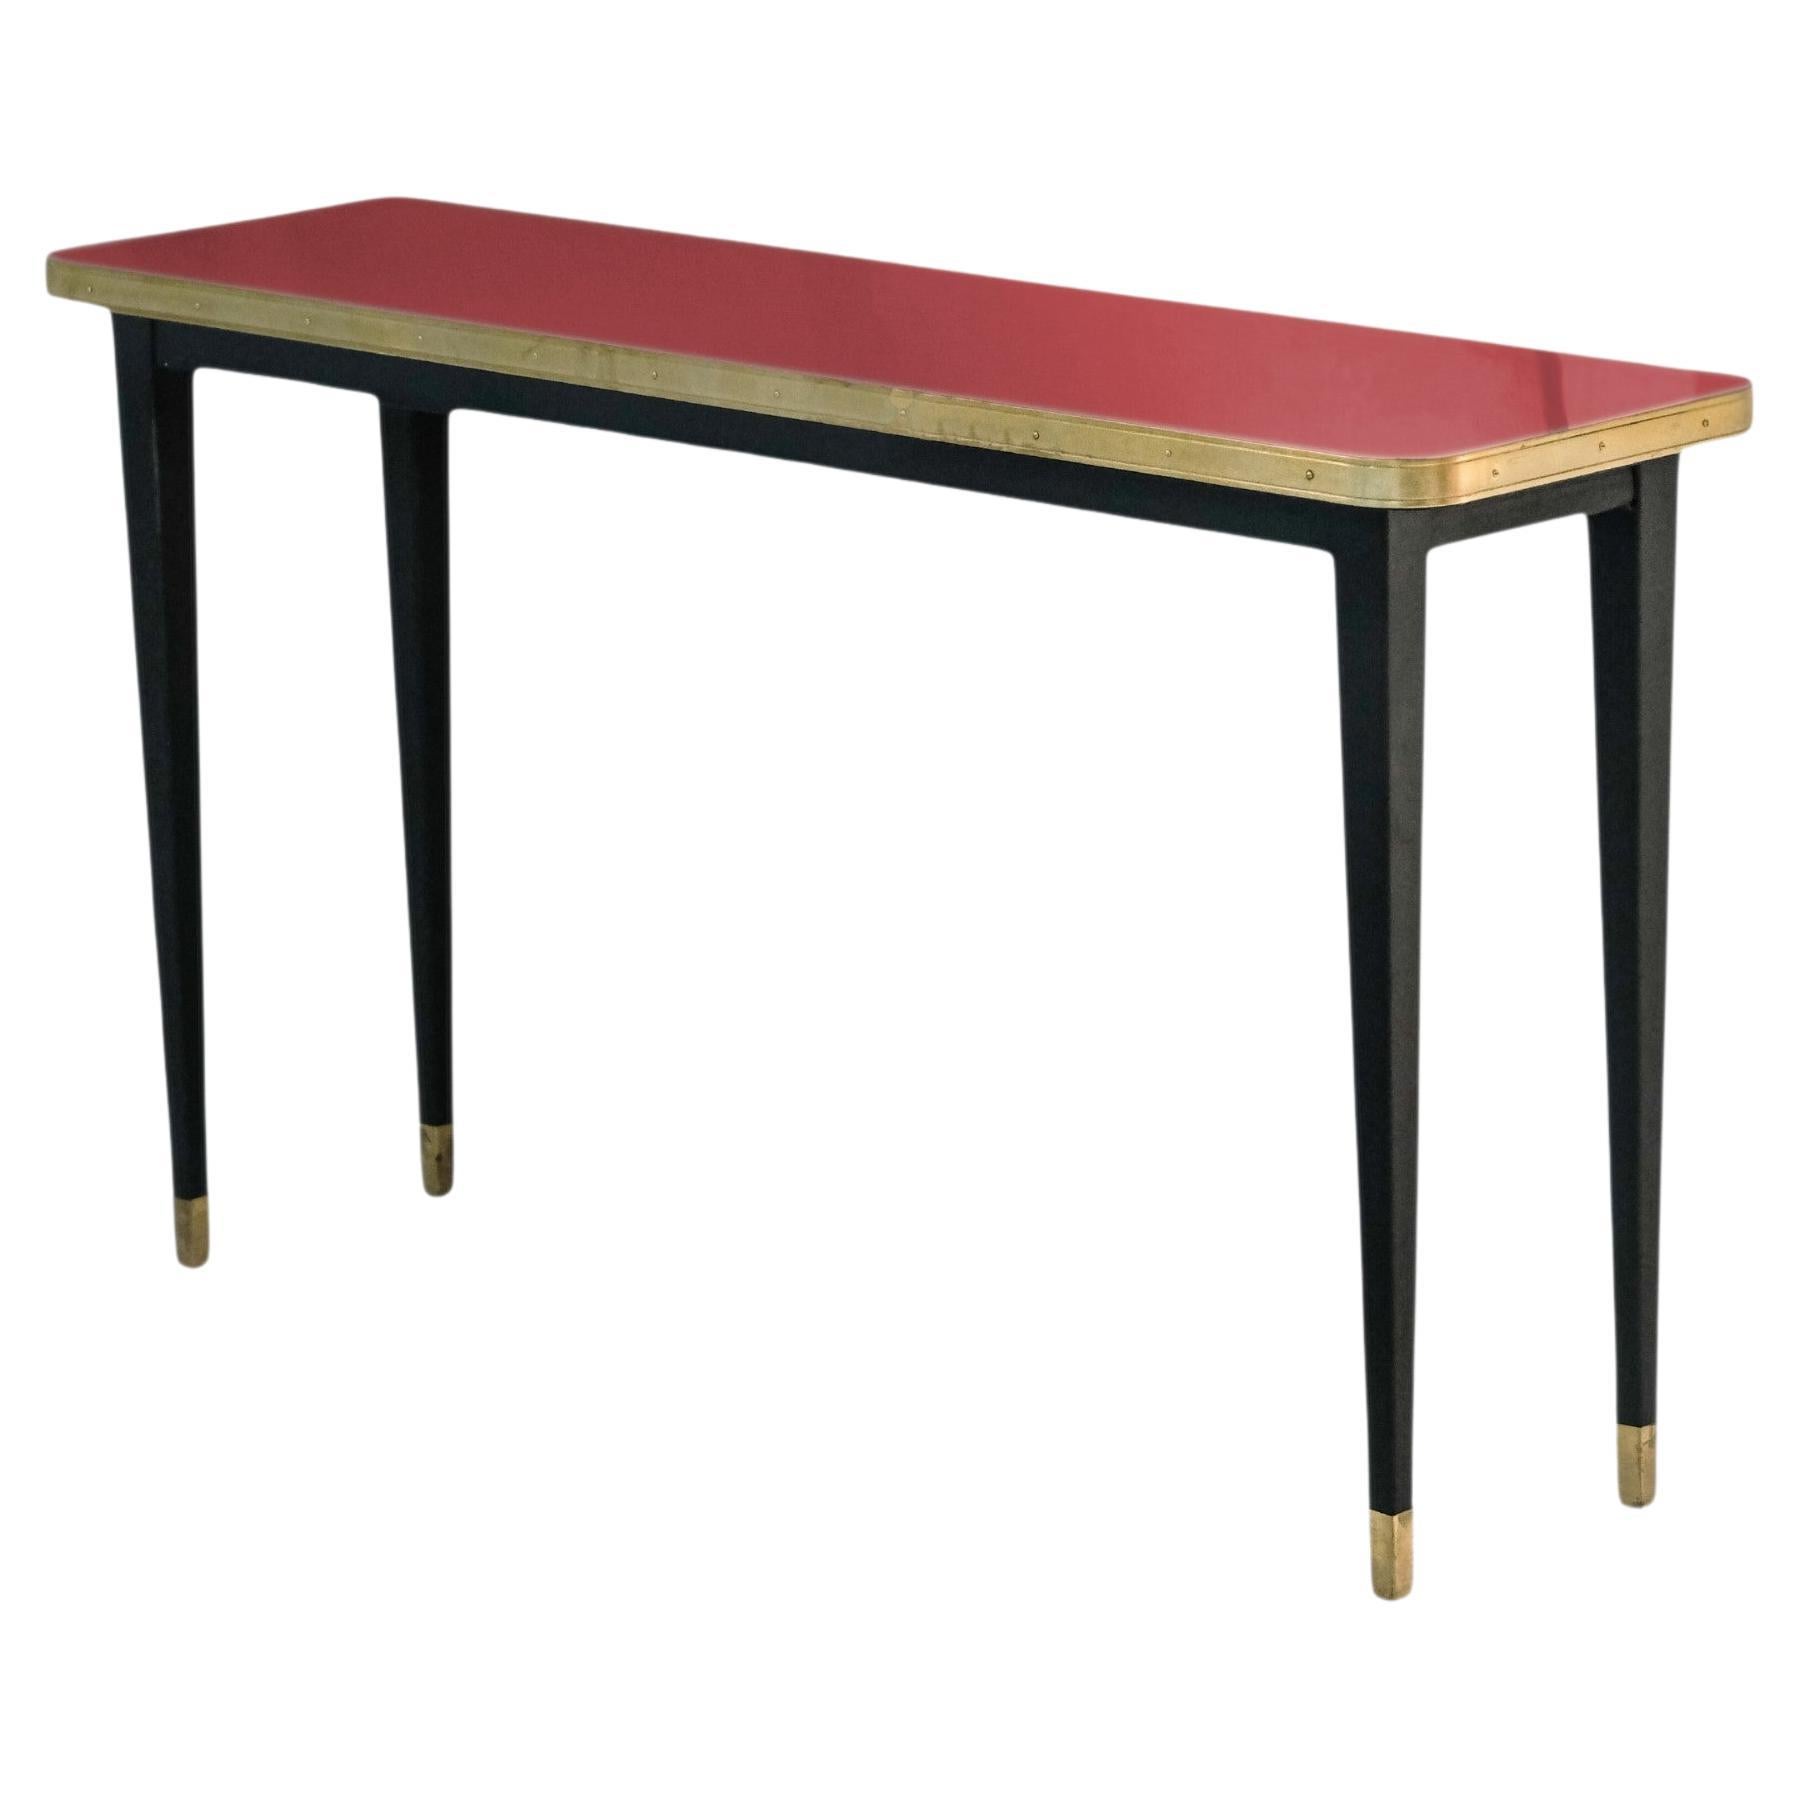 Console Table, High Gloss Laminate & Brass Details, Burgundy - M For Sale